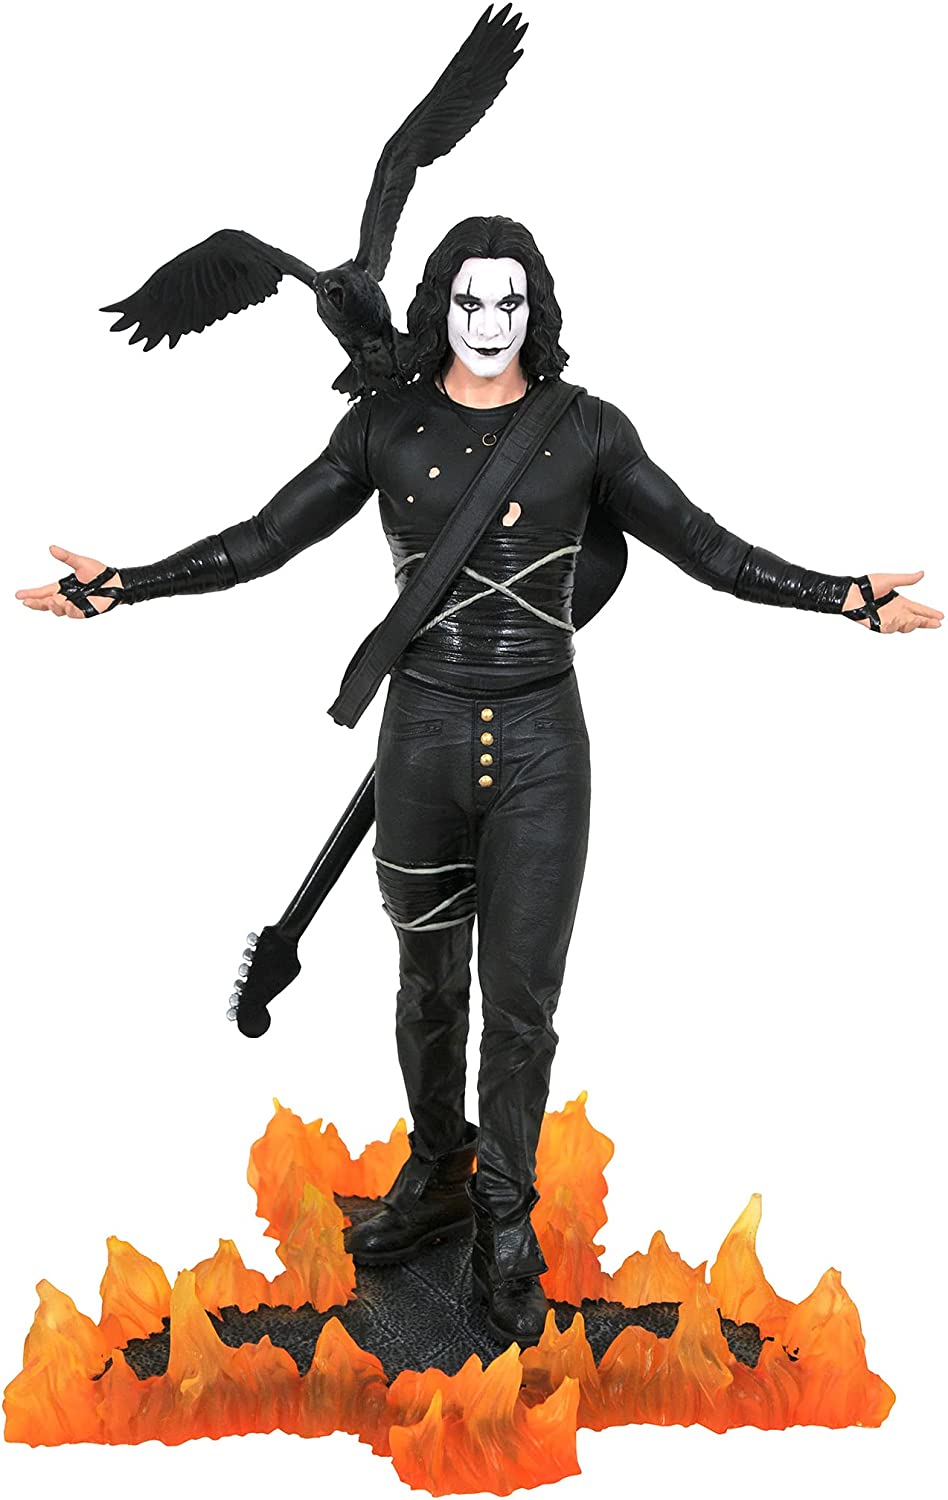 DIAMOND SELECT TOYS The Crow Movie Premier Collection Statue